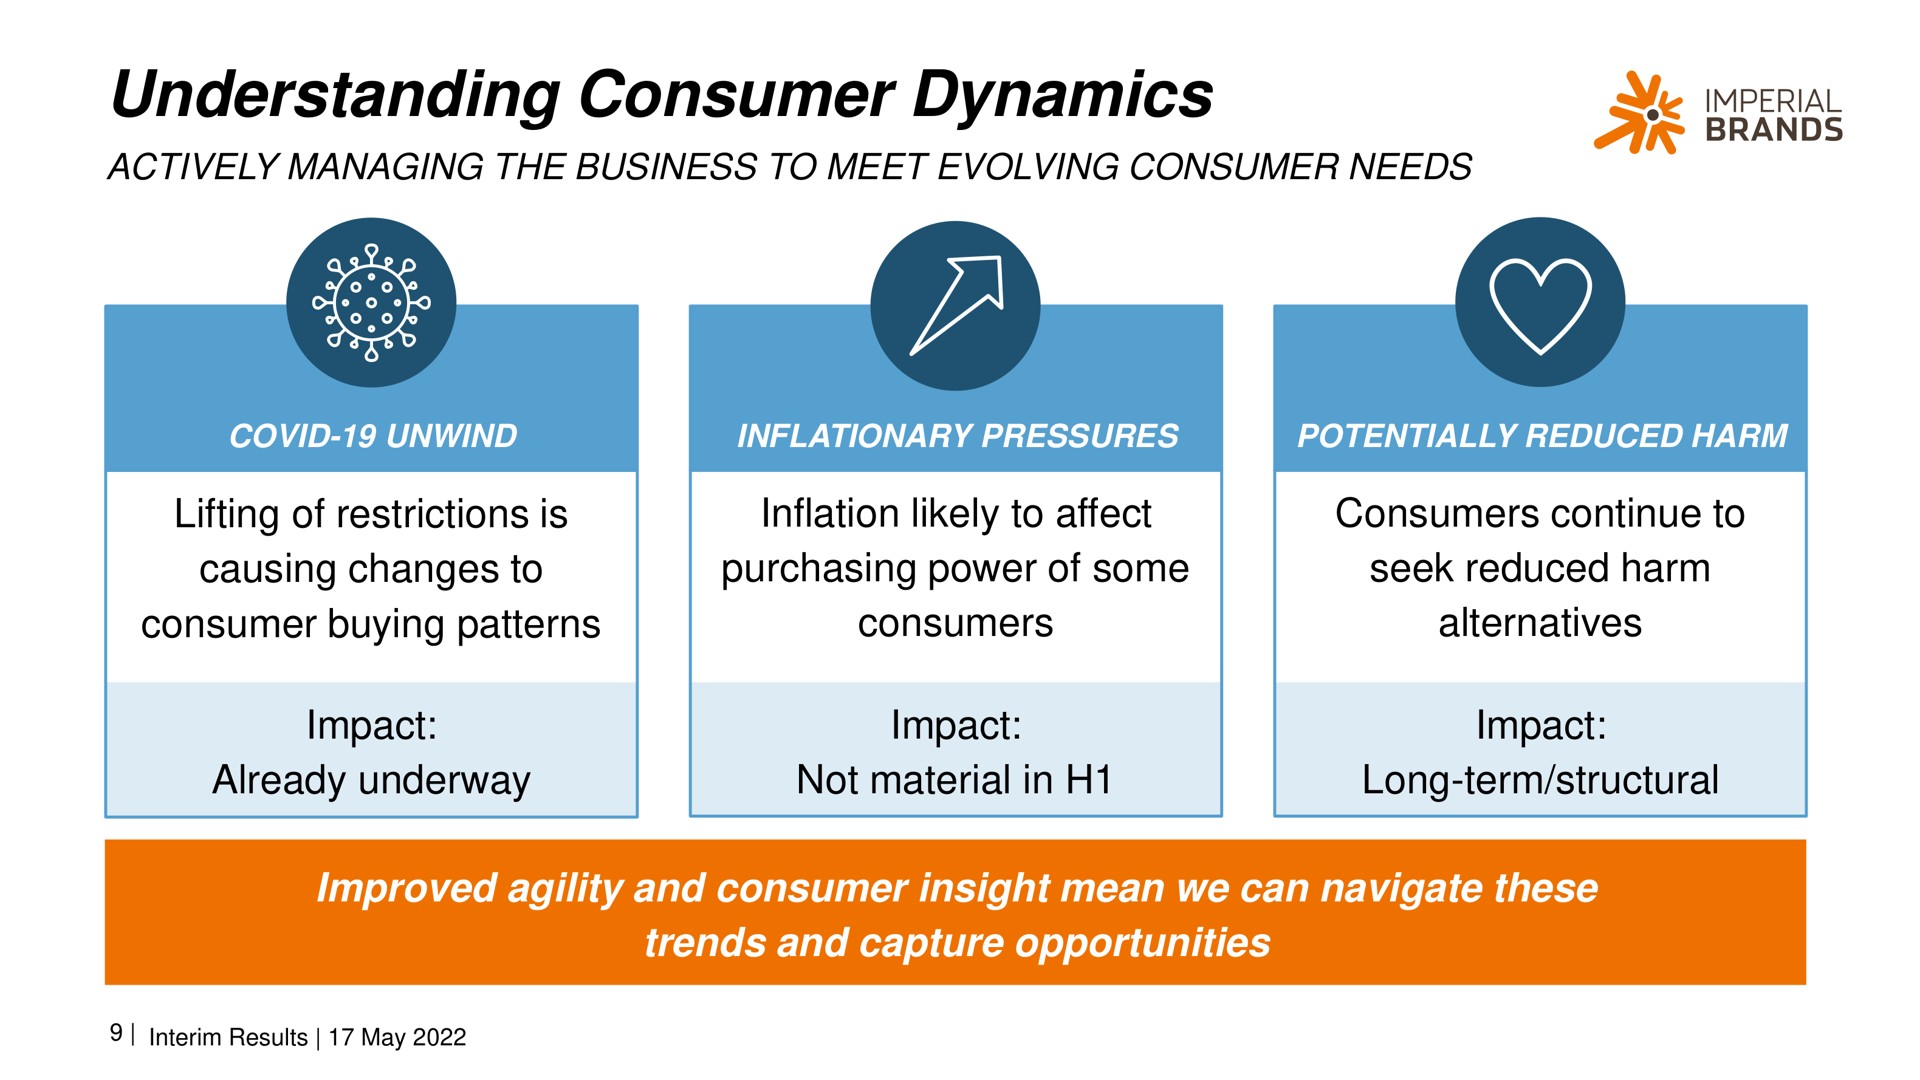 understanding consumer dynamics me imperial | Imperial Brands